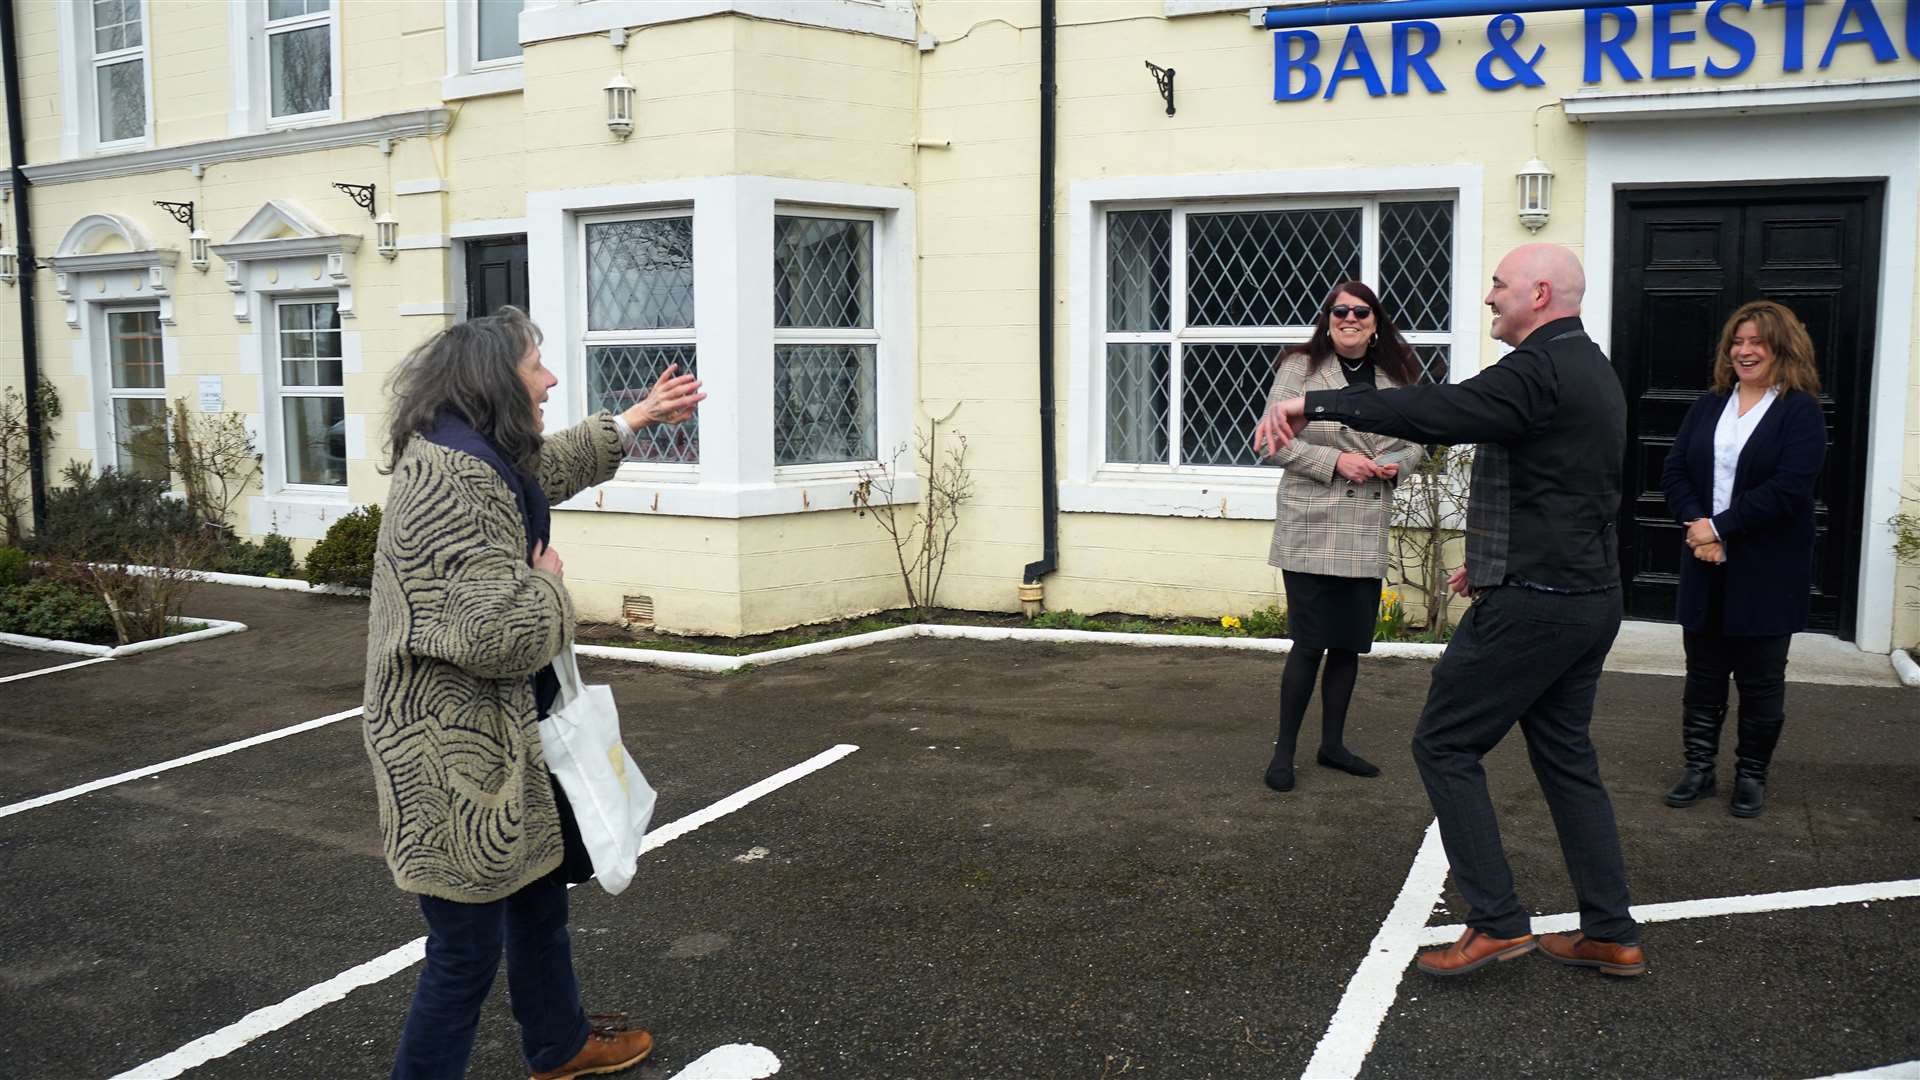 A local well-wisher bids farewell to former owners Steven and Sharn outside the Portland Hotel. Picture: DGS